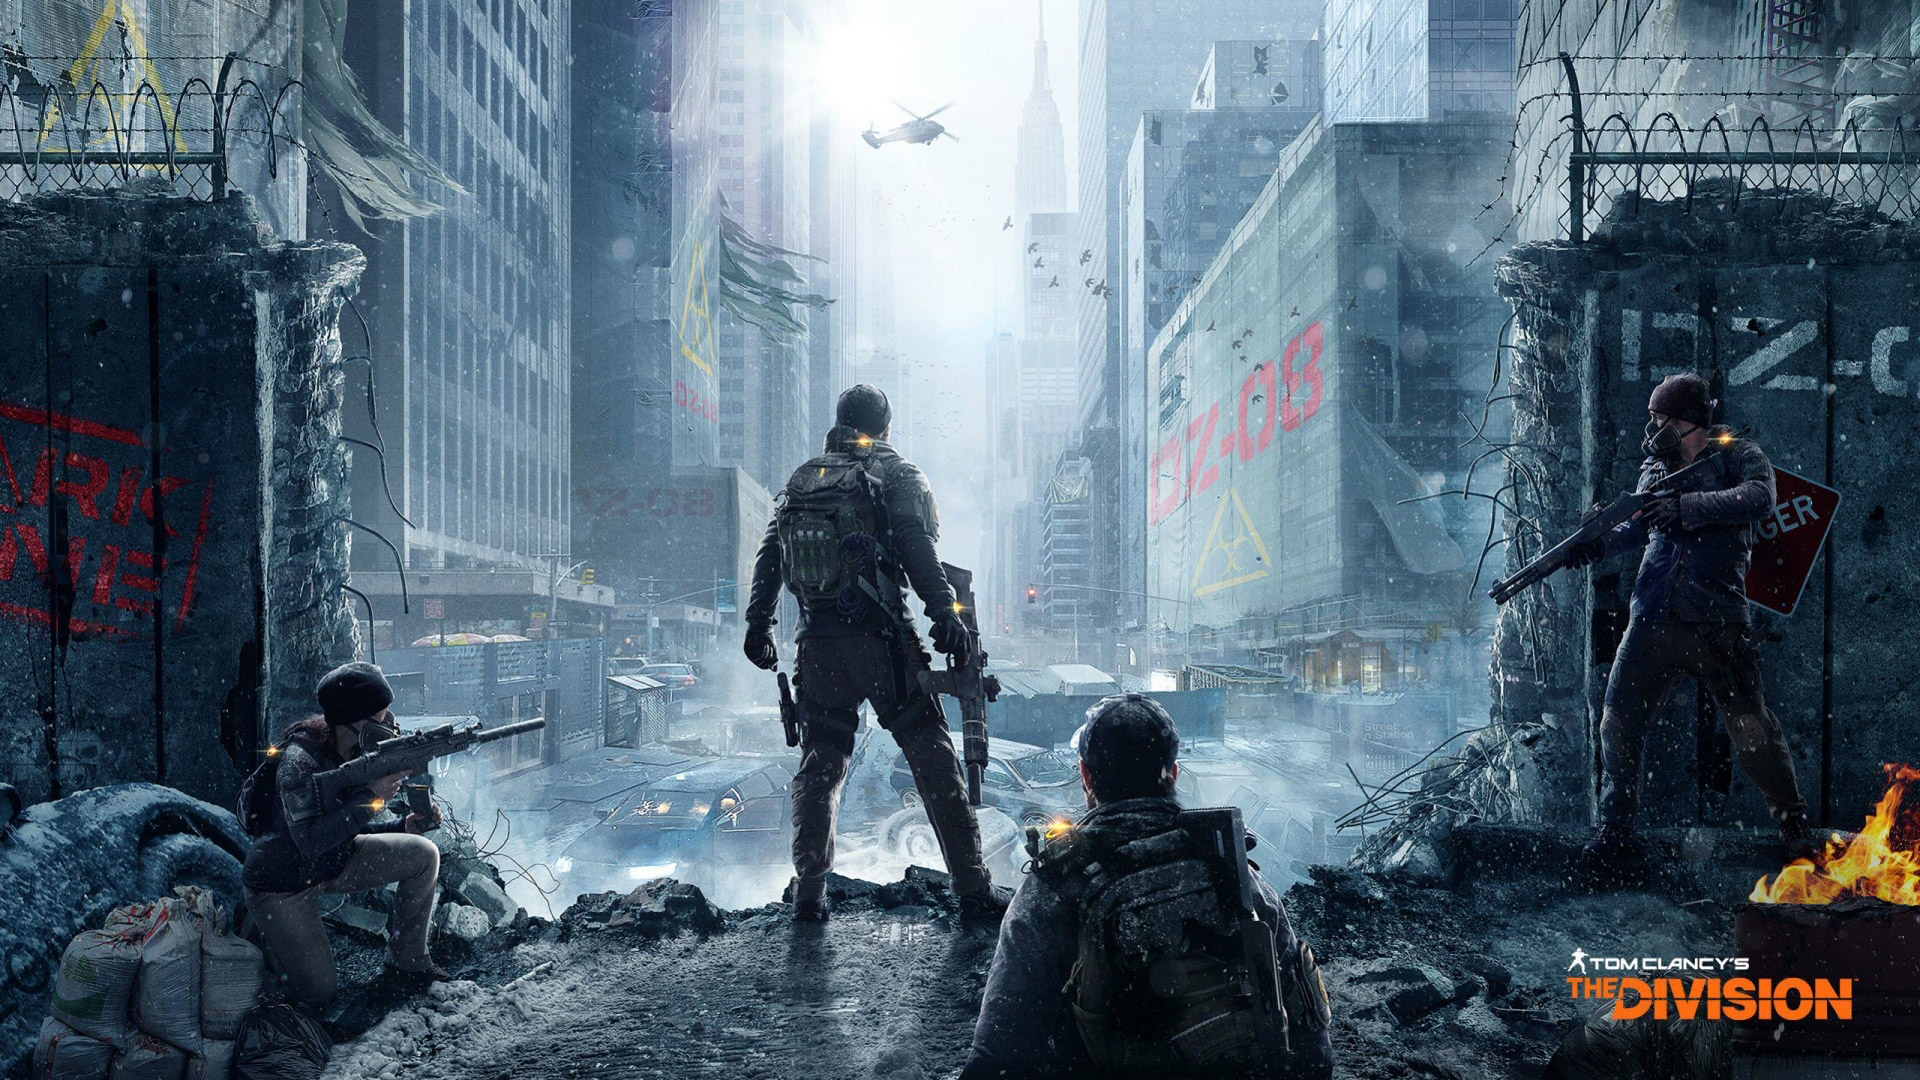 The Division Wallpaper In